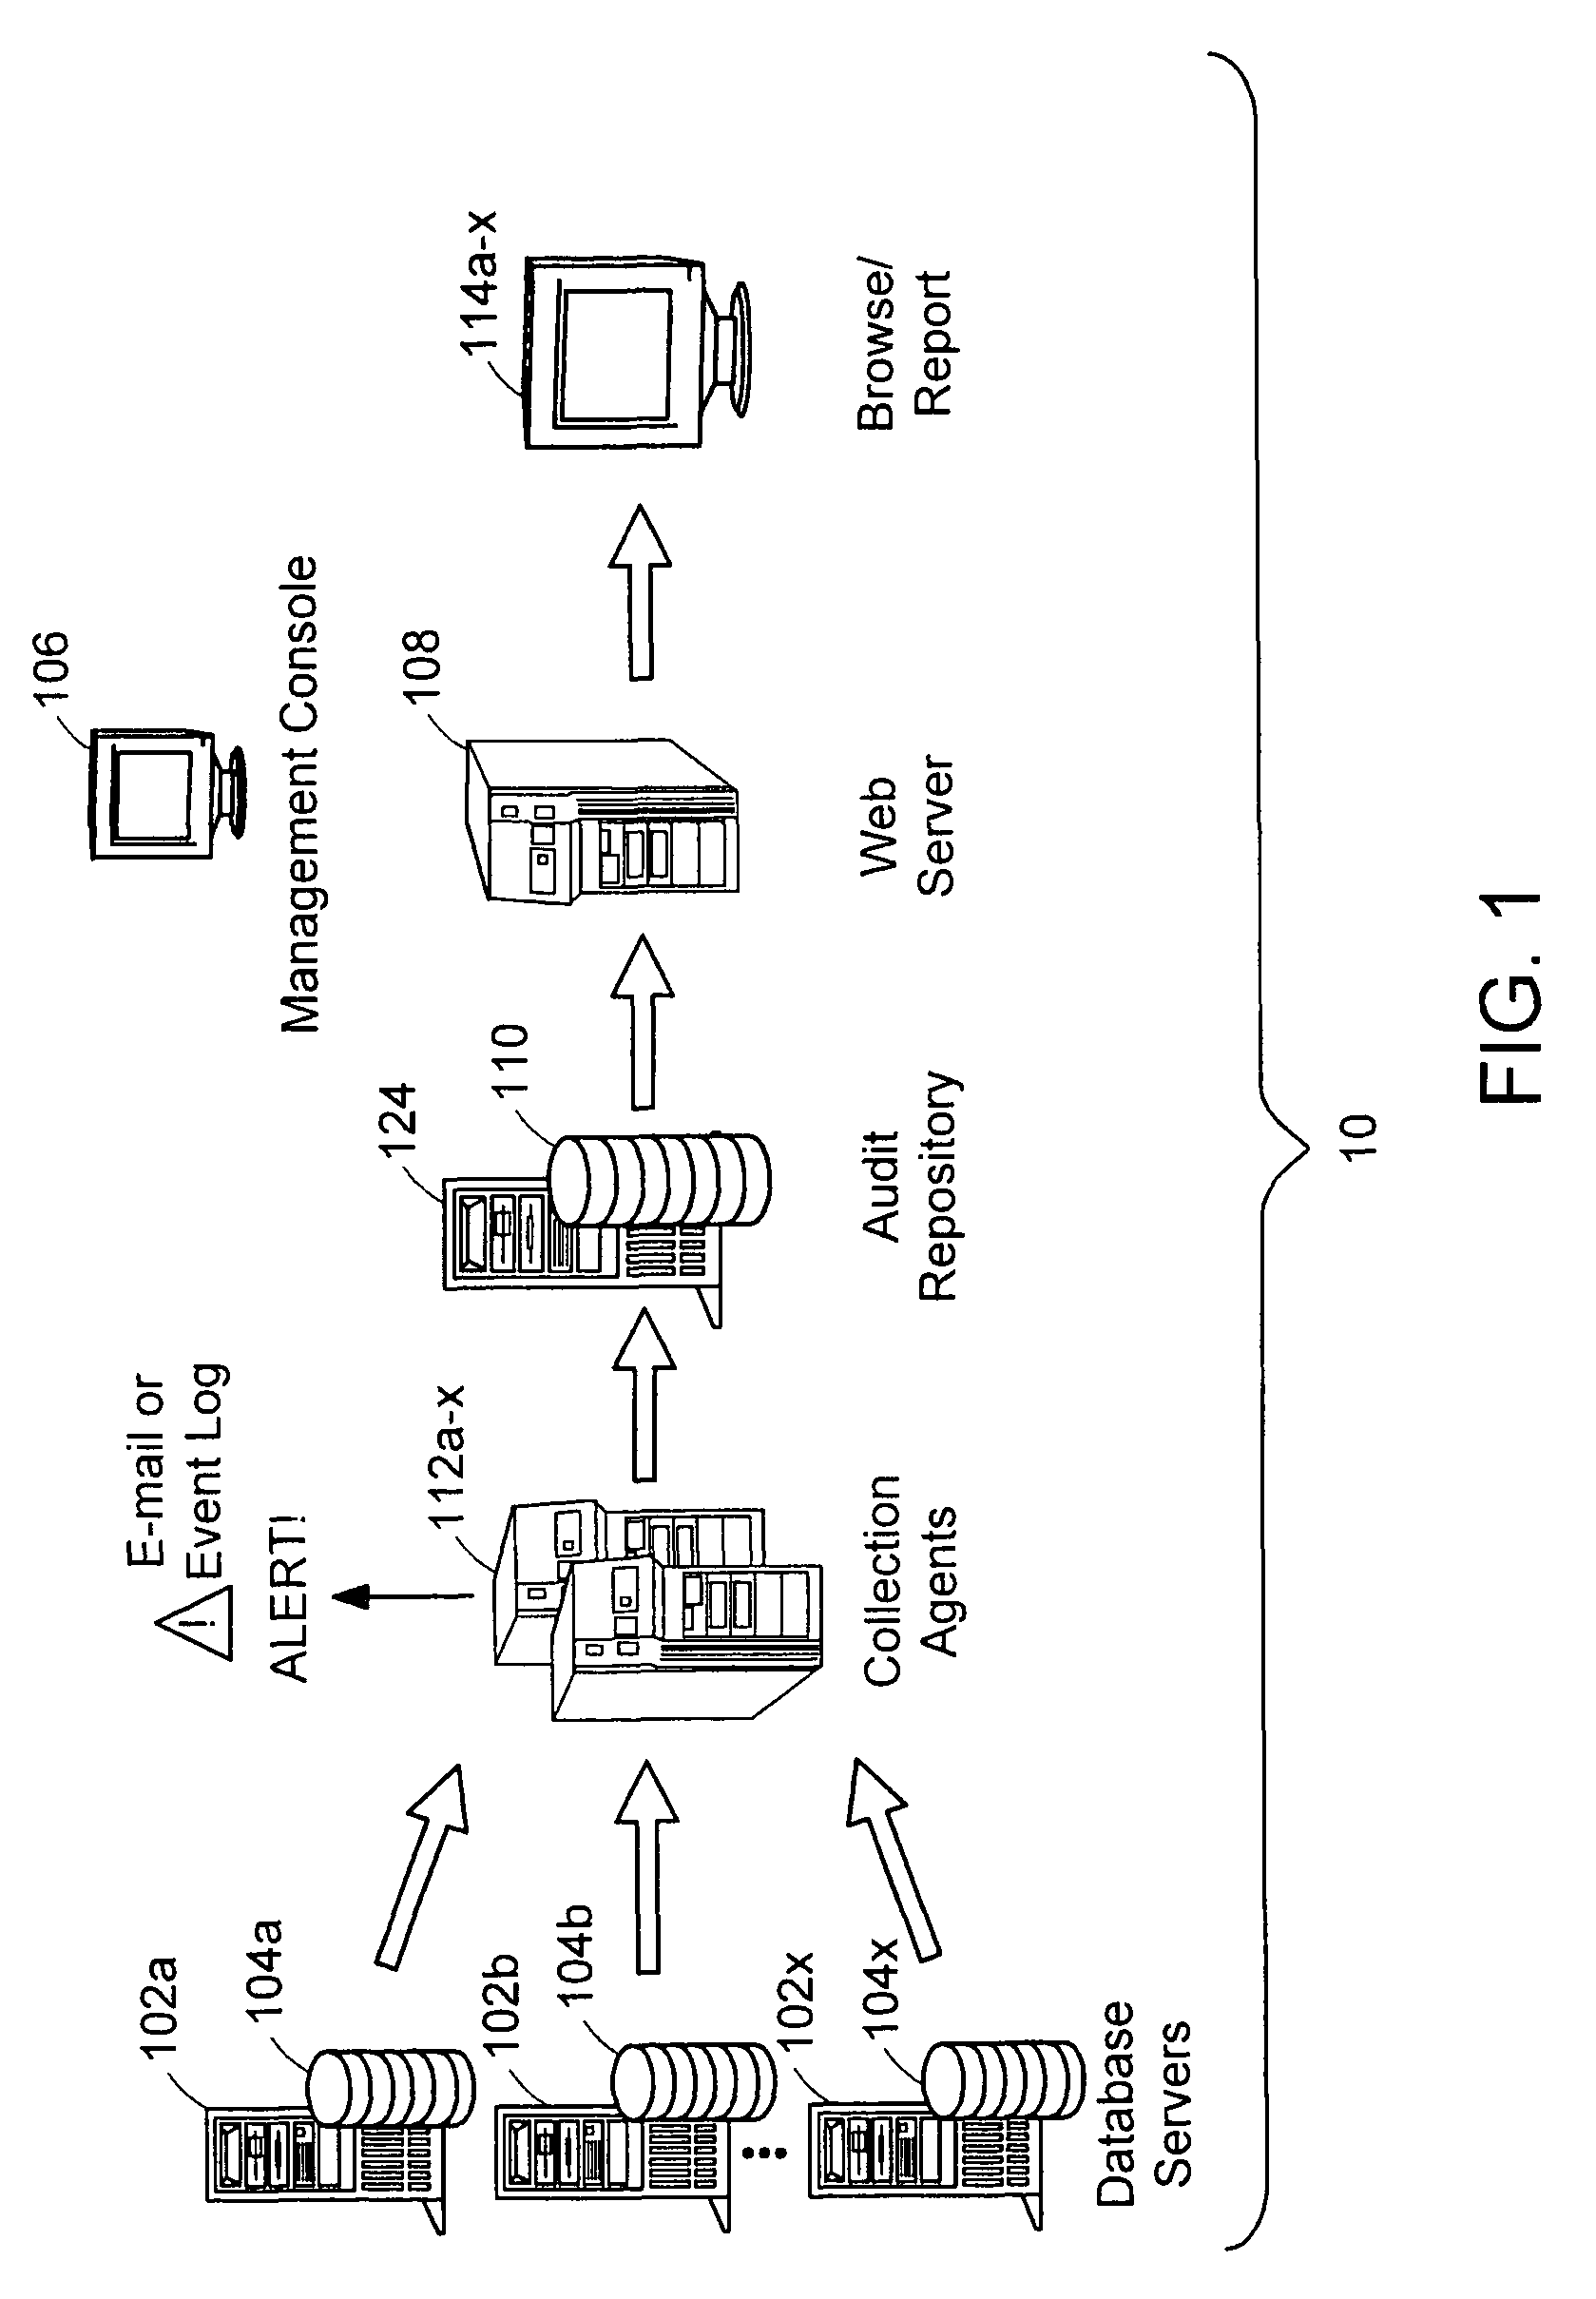 Process and system for auditing database activity